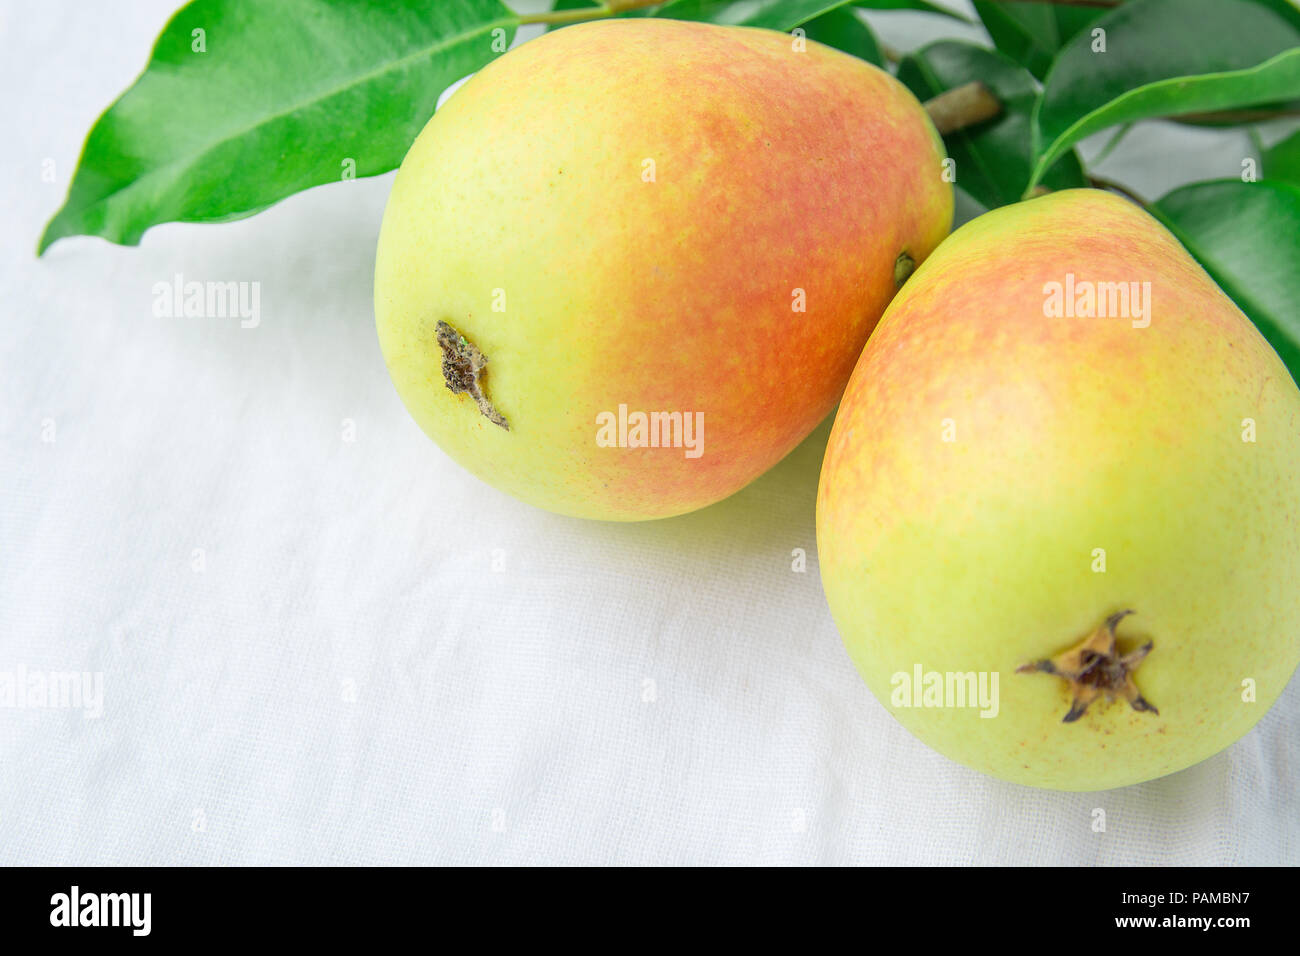 Beautiful Autumnal Background. Ripe Organic Pears of Pastel Colors Yellow Red Green Tree Branch on White Linen Cotton. Minimalist Japanese Provence St Stock Photo